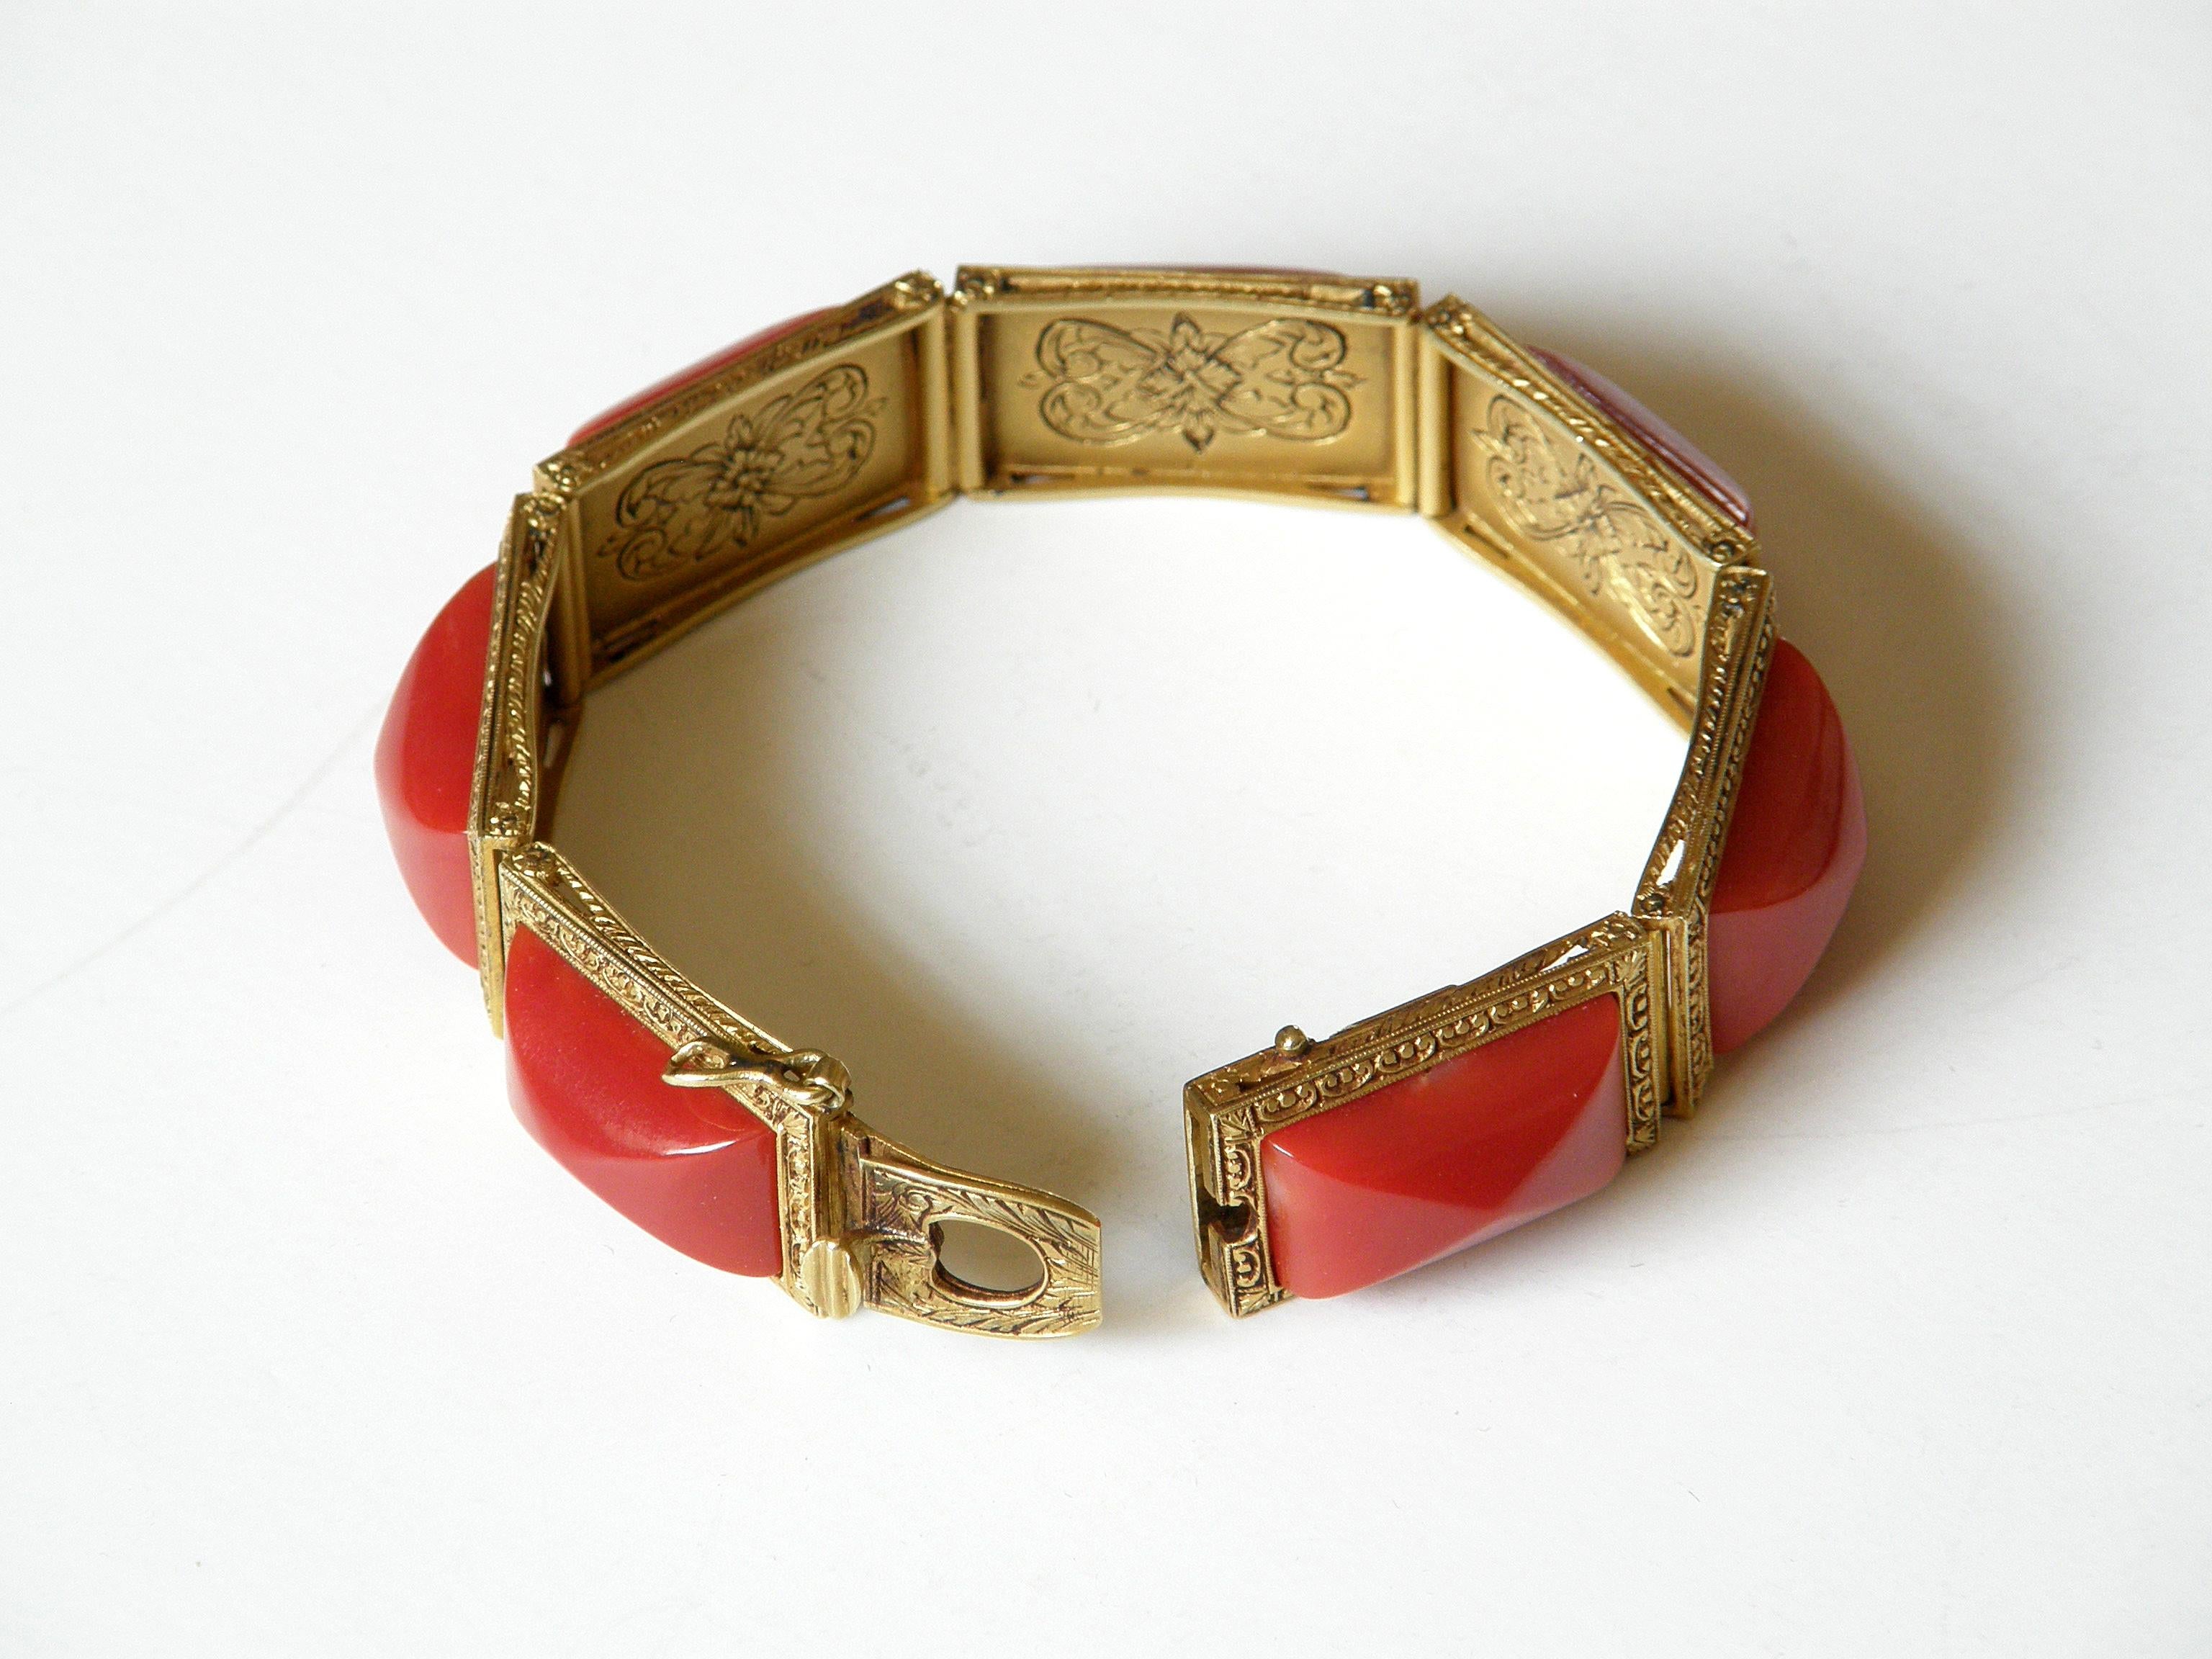 This handsome, gold link bracelet is beautifully detailed. Each link is set with a rectangular, pyramid cabochon stone. The stones are framed by a delicate, scrolling pattern in the gold. Each link has pierced, decorative side panels to add strength